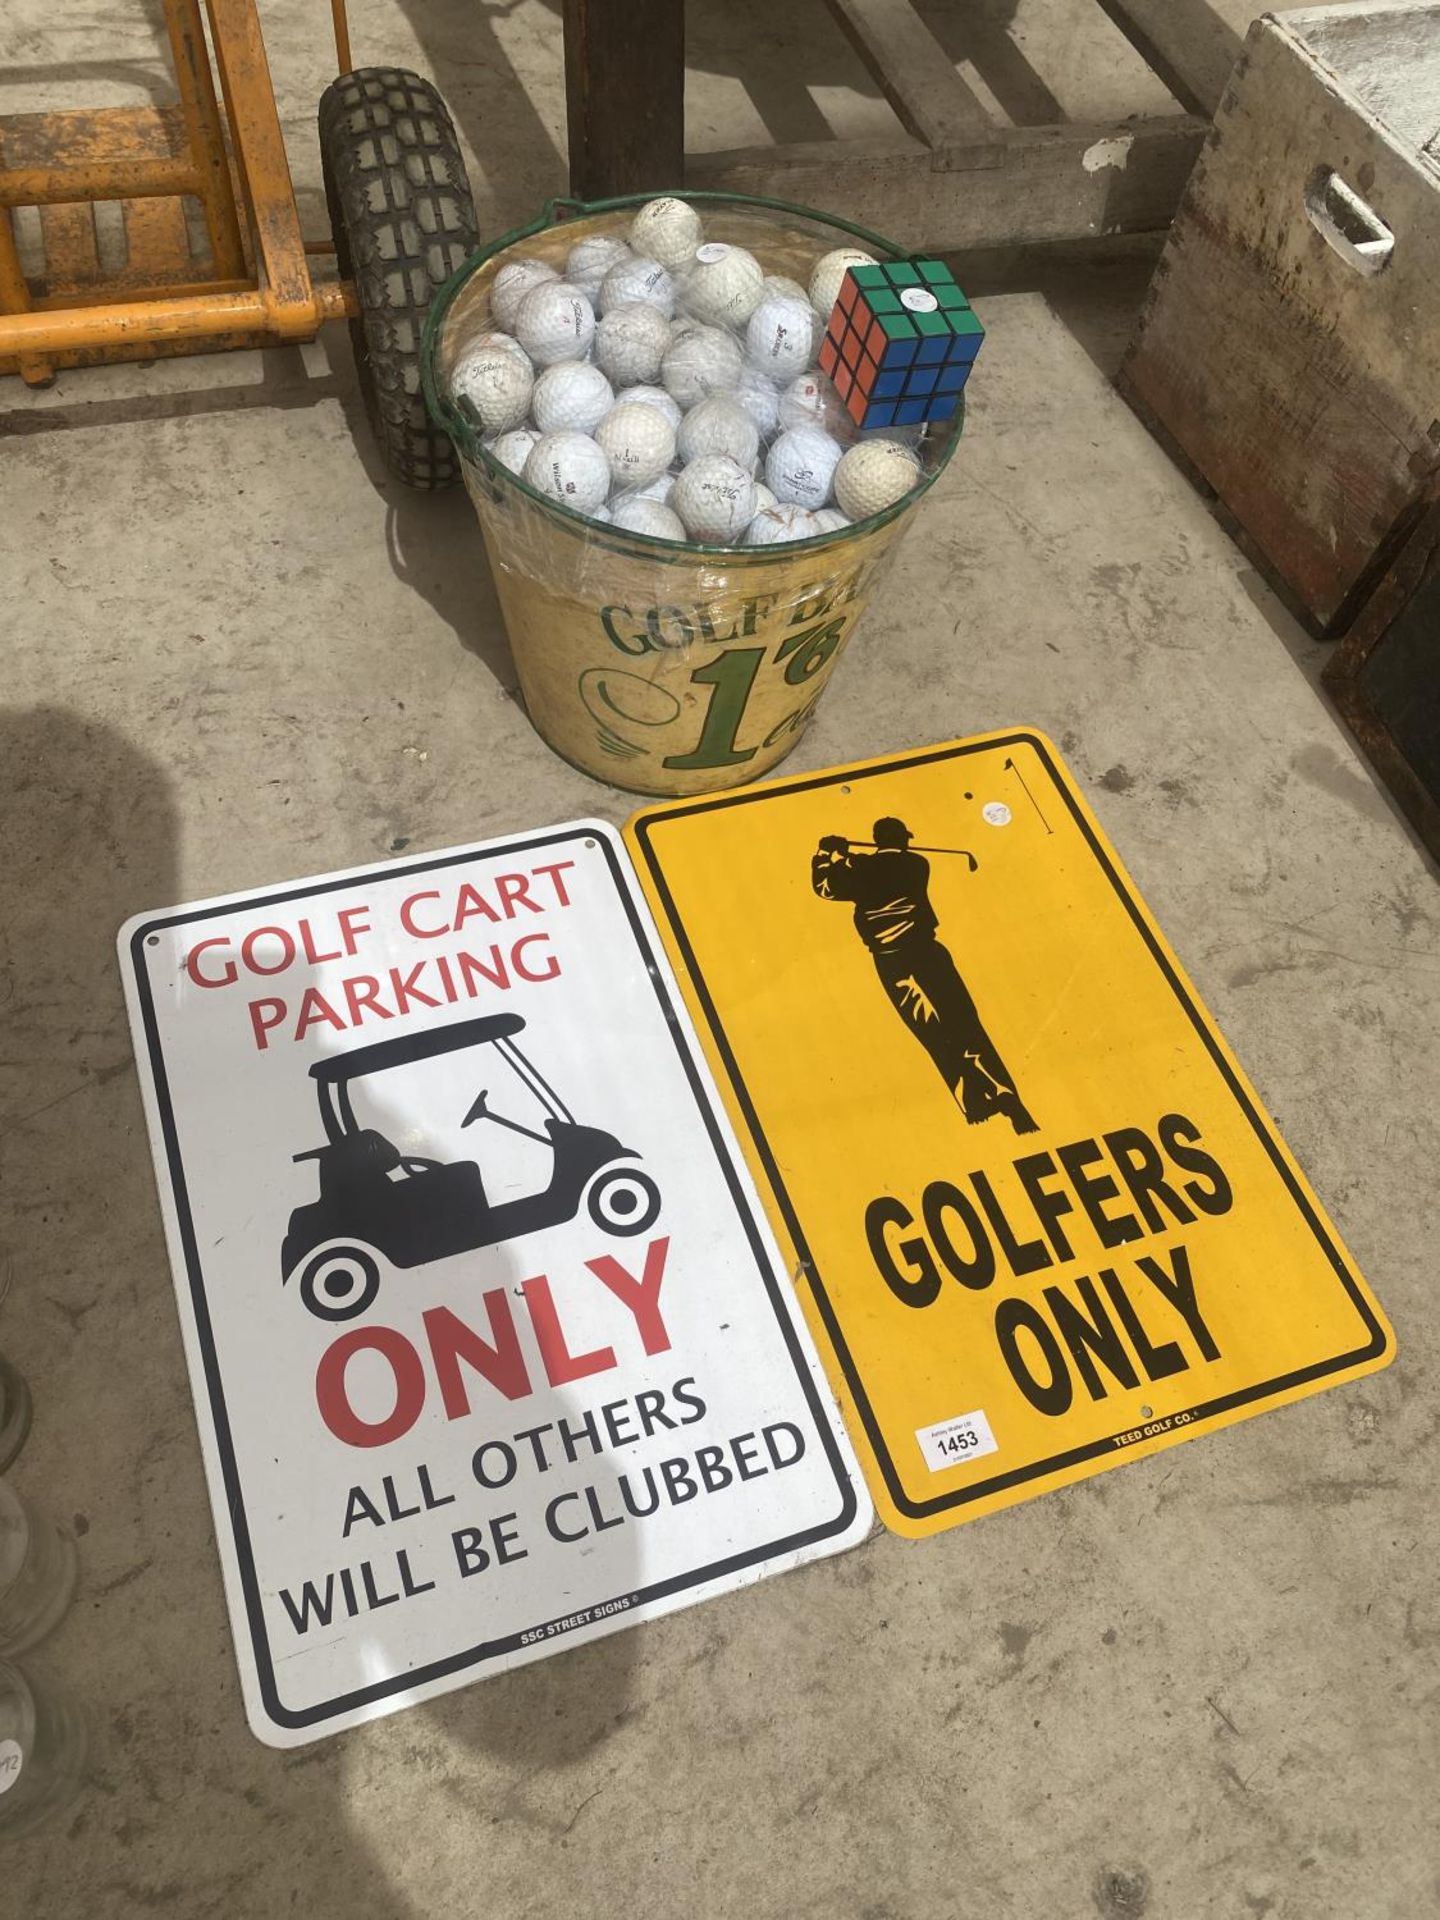 A LARGE QUANTITY OF GOLF BALLS, TWO GOLF RELATED SIGNS AND A GOLF BUCKET